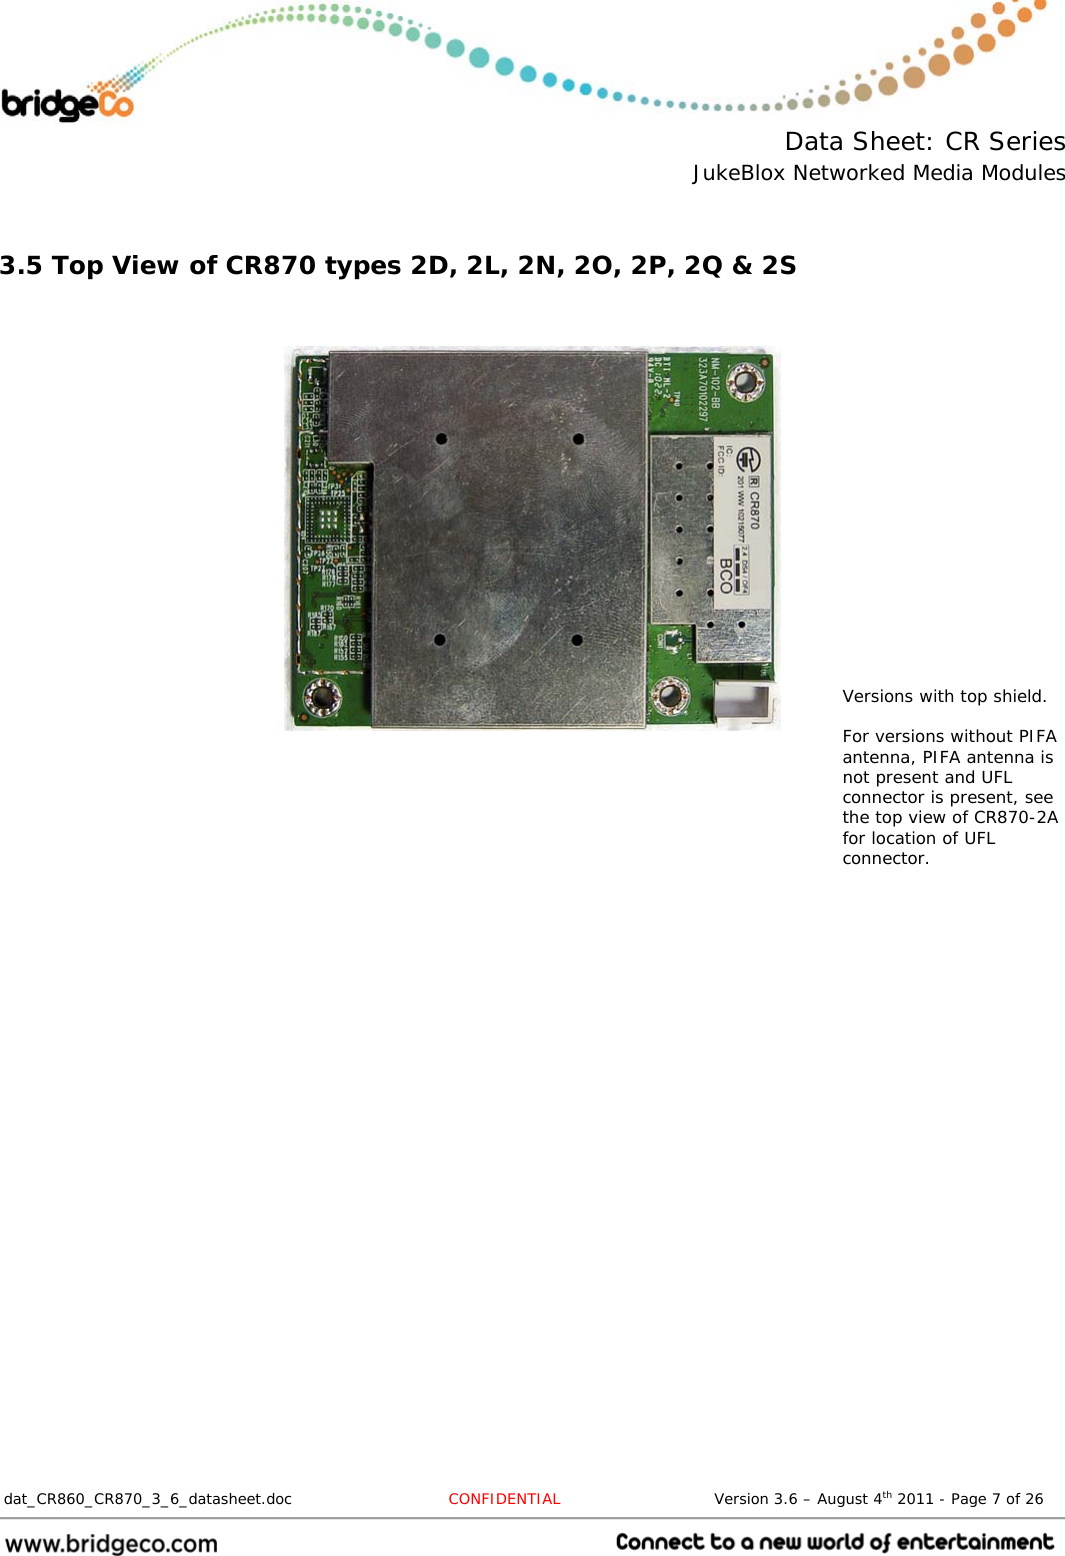  Data Sheet: CR Series JukeBlox Networked Media Modules  dat_CR860_CR870_3_6_datasheet.doc  CONFIDENTIAL                              Version 3.6 – August 4th 2011 - Page 7 of 26                                  3.5 Top View of CR870 types 2D, 2L, 2N, 2O, 2P, 2Q &amp; 2S       Versions with top shield.  For versions without PIFA antenna, PIFA antenna is not present and UFL connector is present, see the top view of CR870-2A for location of UFL connector. 